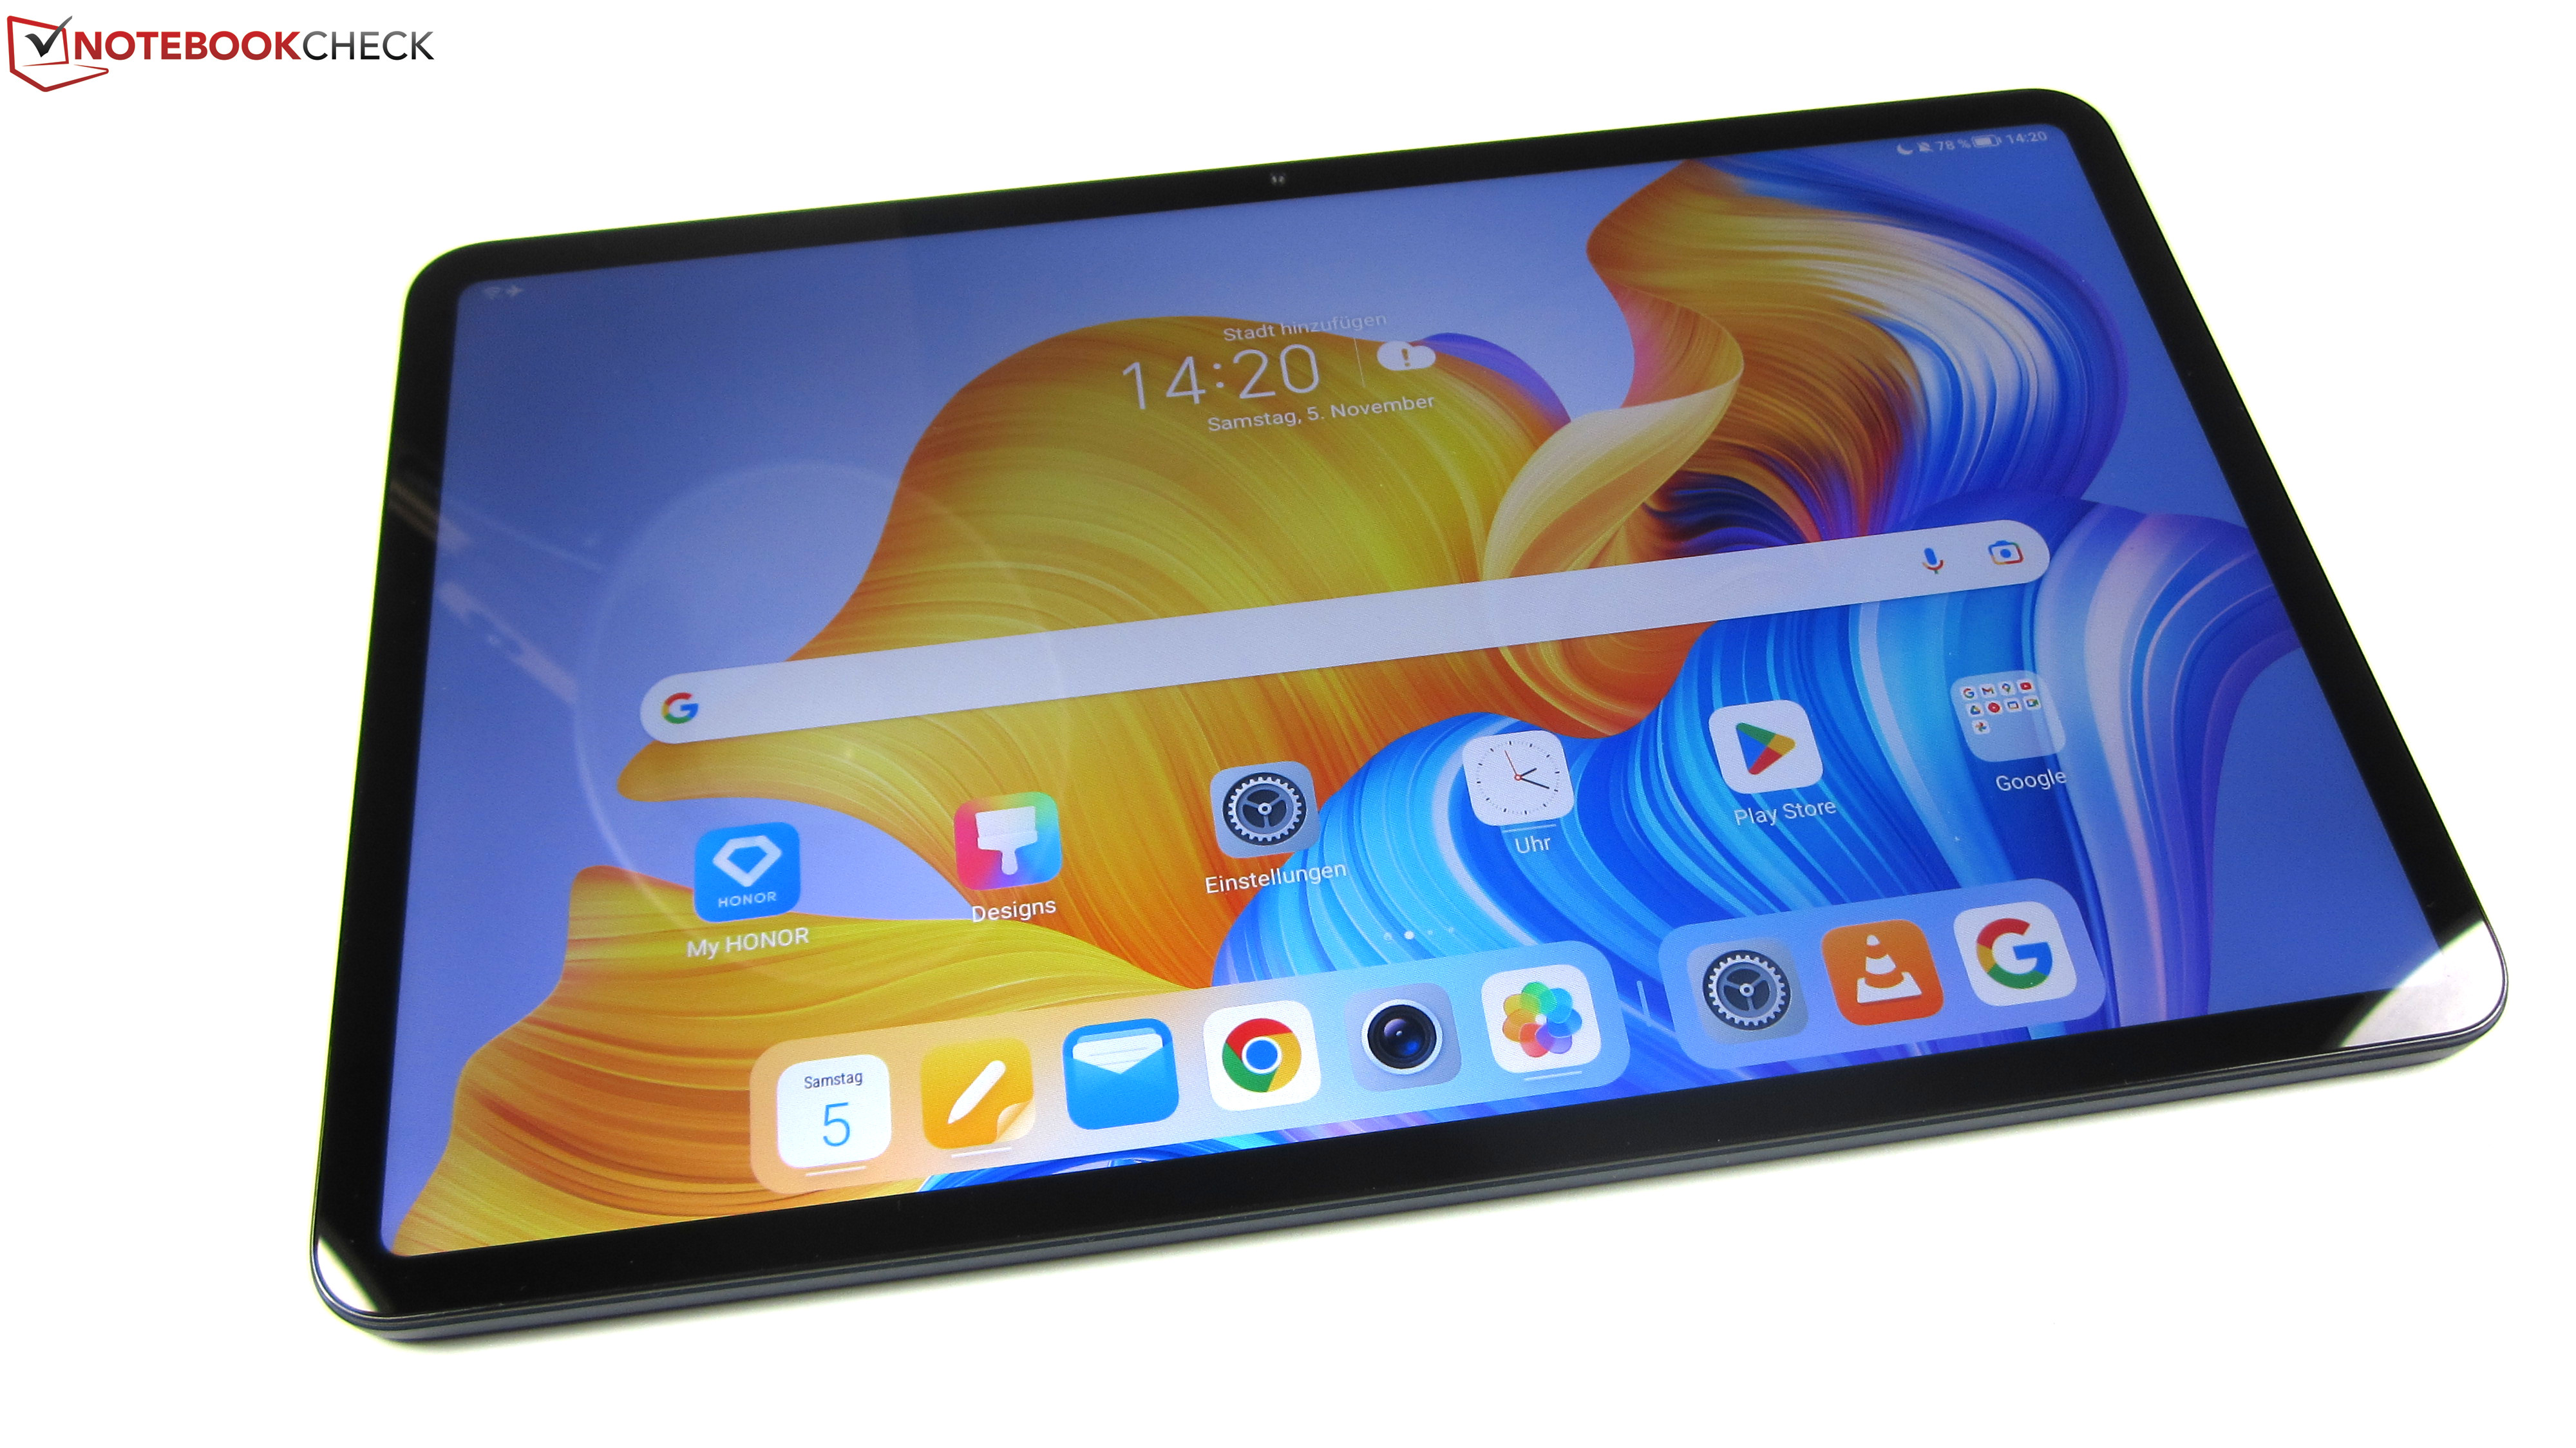 HONOR Pad 8 Specification - Display, Processor, Hardware